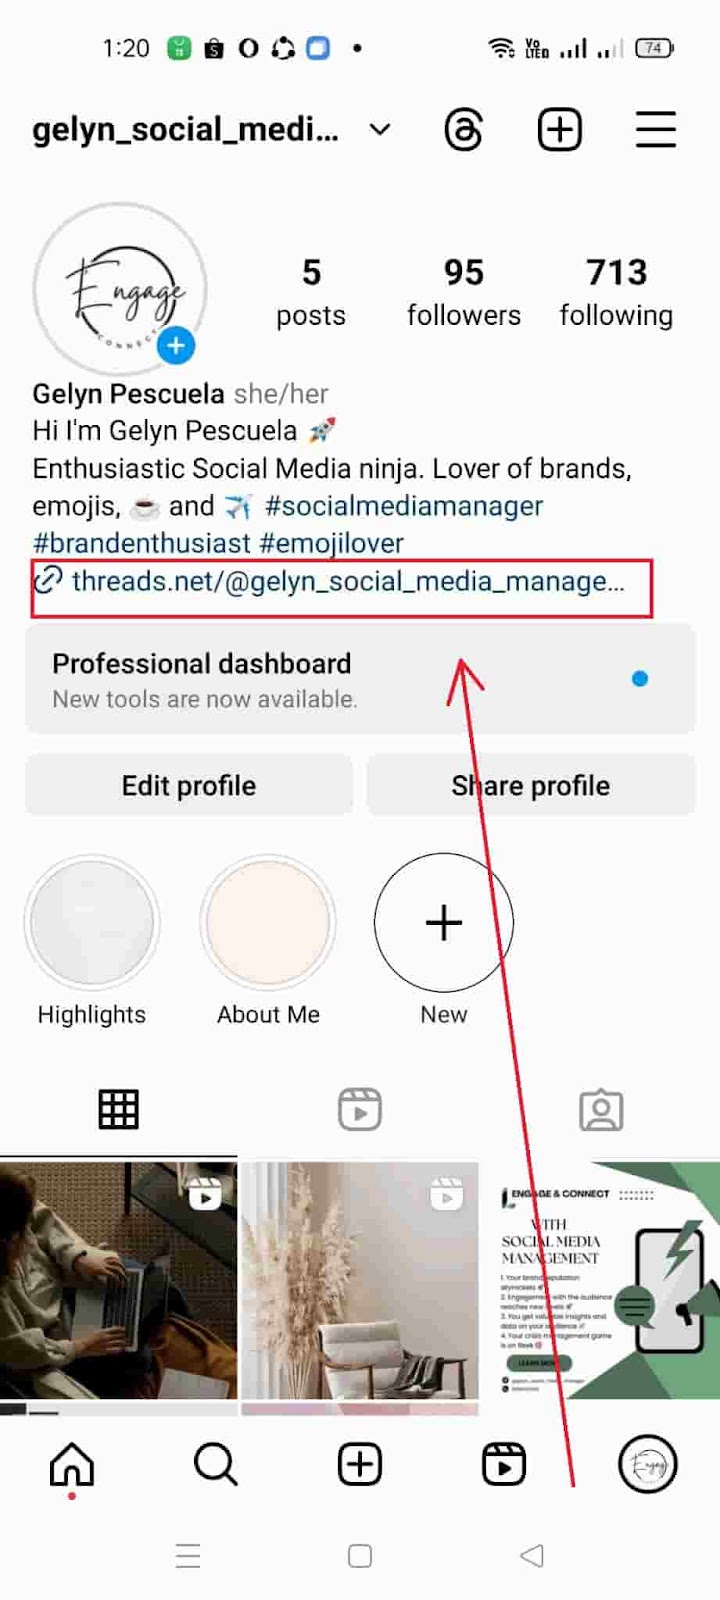 How to Unhide the Threads Badge on Instagram - Show Instagram Threads Badge